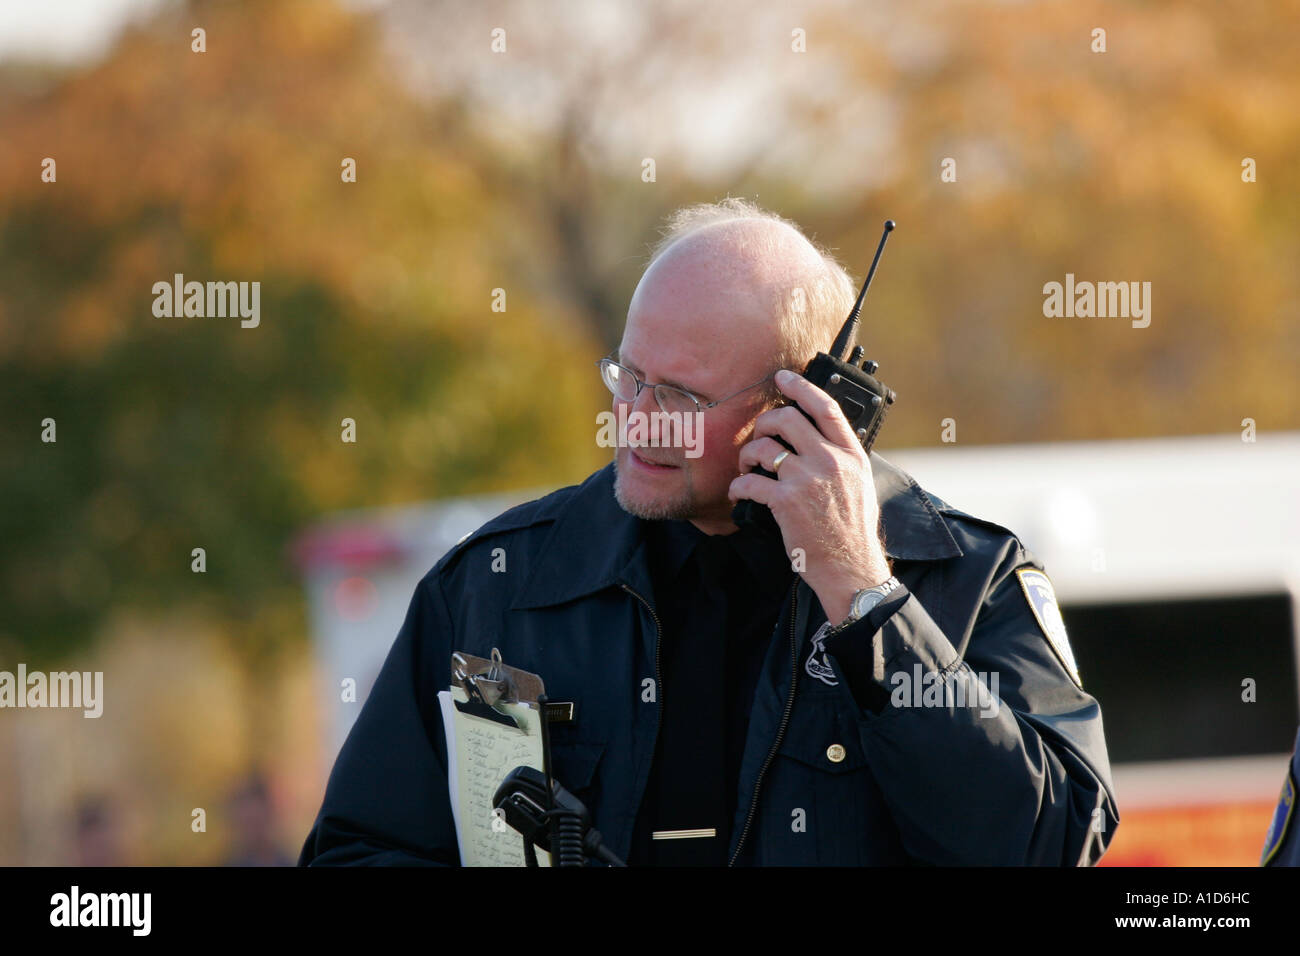 A police detective listening to the radio at his ear Stock Photo